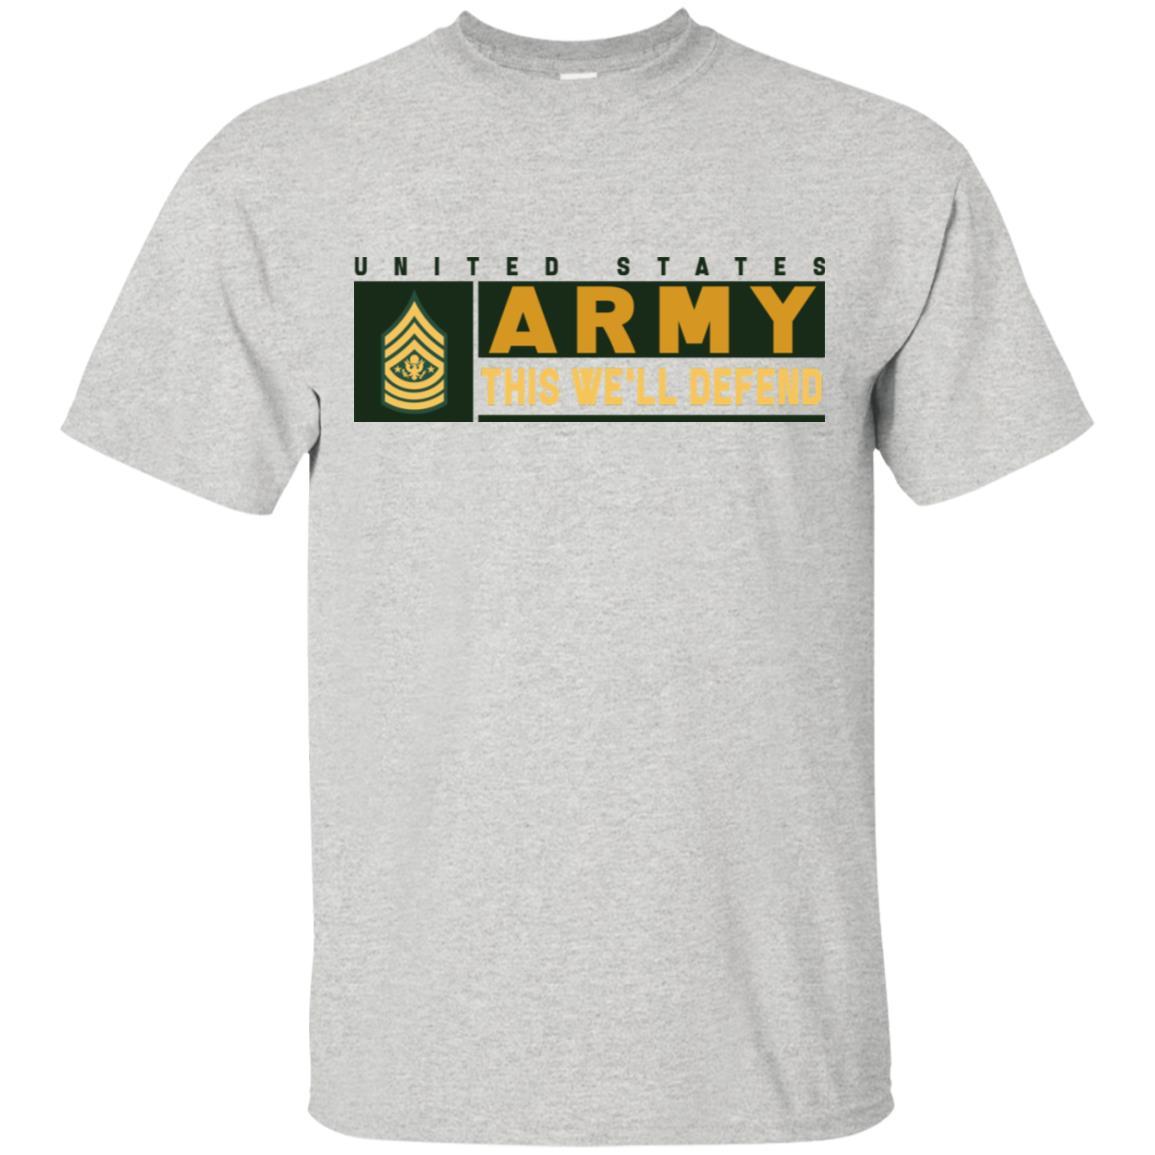 US Army E-9 SMA This We Will Defend T-Shirt On Front For Men-TShirt-Army-Veterans Nation